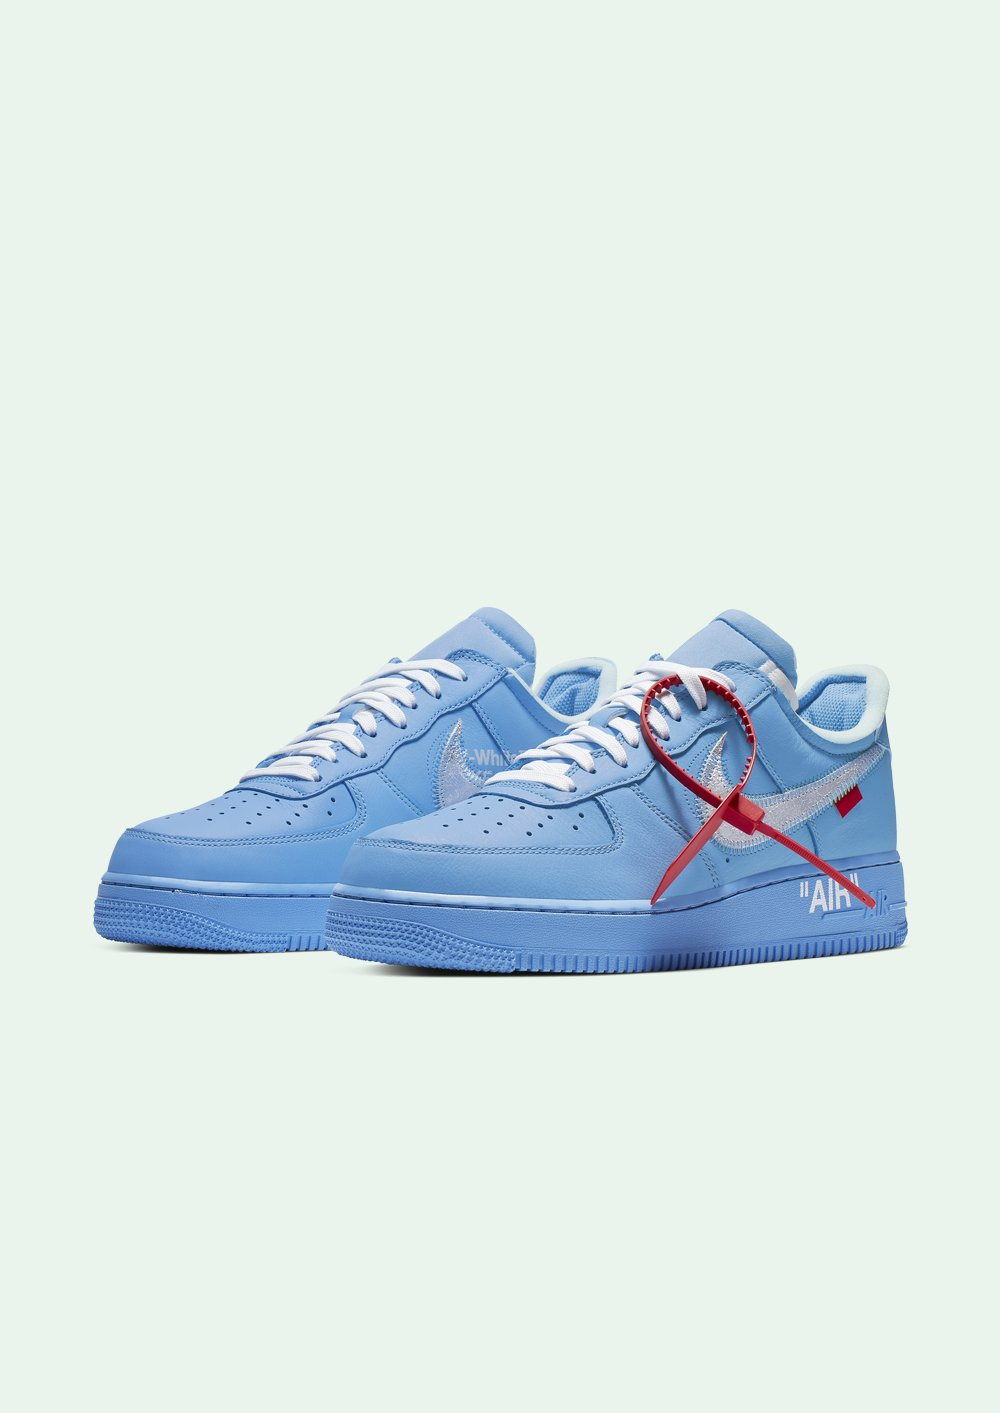 OFF WHITE X NIKE AIR FORCE 1 MCA BLUE. Off white shoes, Shoes, Dream shoes